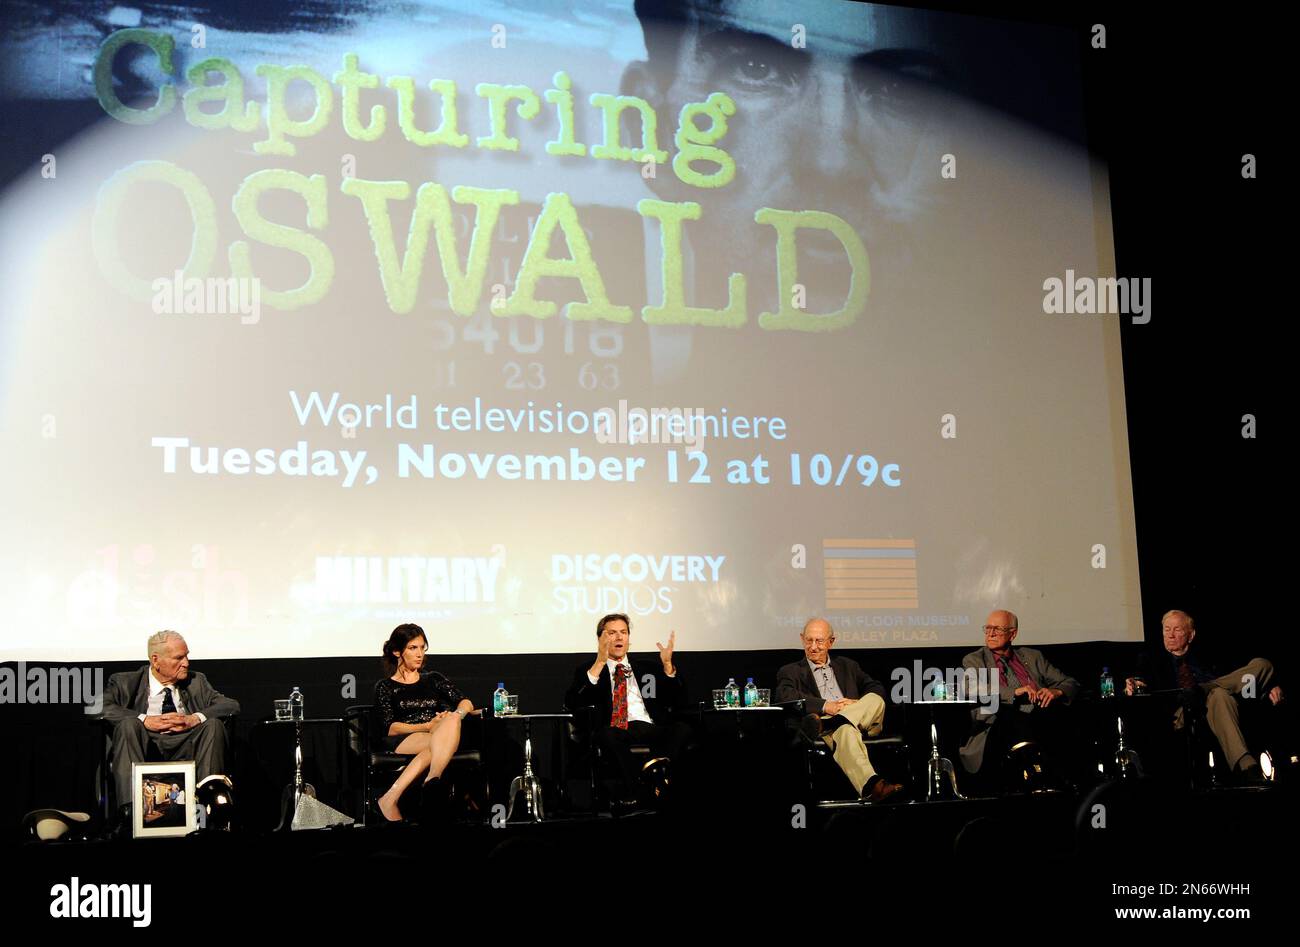 https://c8.alamy.com/comp/2N66WHH/image-distributed-for-for-discovery-communications-llc-from-left-panel-members-jim-leavelle-kate-griendling-producer-alan-martin-director-jim-ewell-elmer-boyd-and-paul-mccaghren-speak-about-world-premiere-screening-of-the-military-channels-capturing-oswald-on-monday-nov-11-2013-at-the-texas-theatre-in-dallas-matt-strasenap-images-for-discovery-communications-llc-2N66WHH.jpg